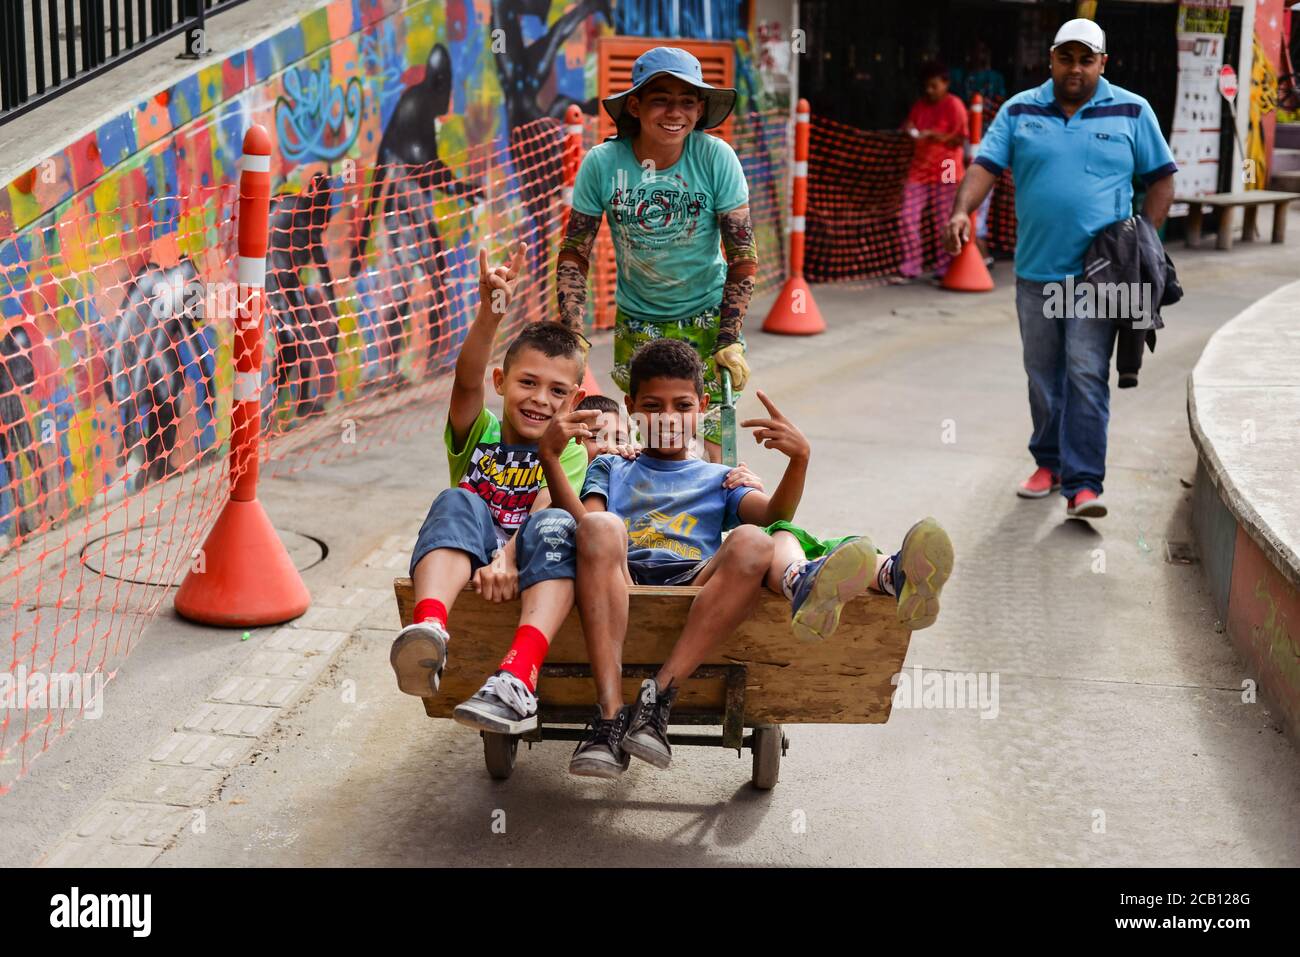 Medellin / Colombia - July 15, 2017: Colombian children playing riding on wheelbarrow in the street Stock Photo